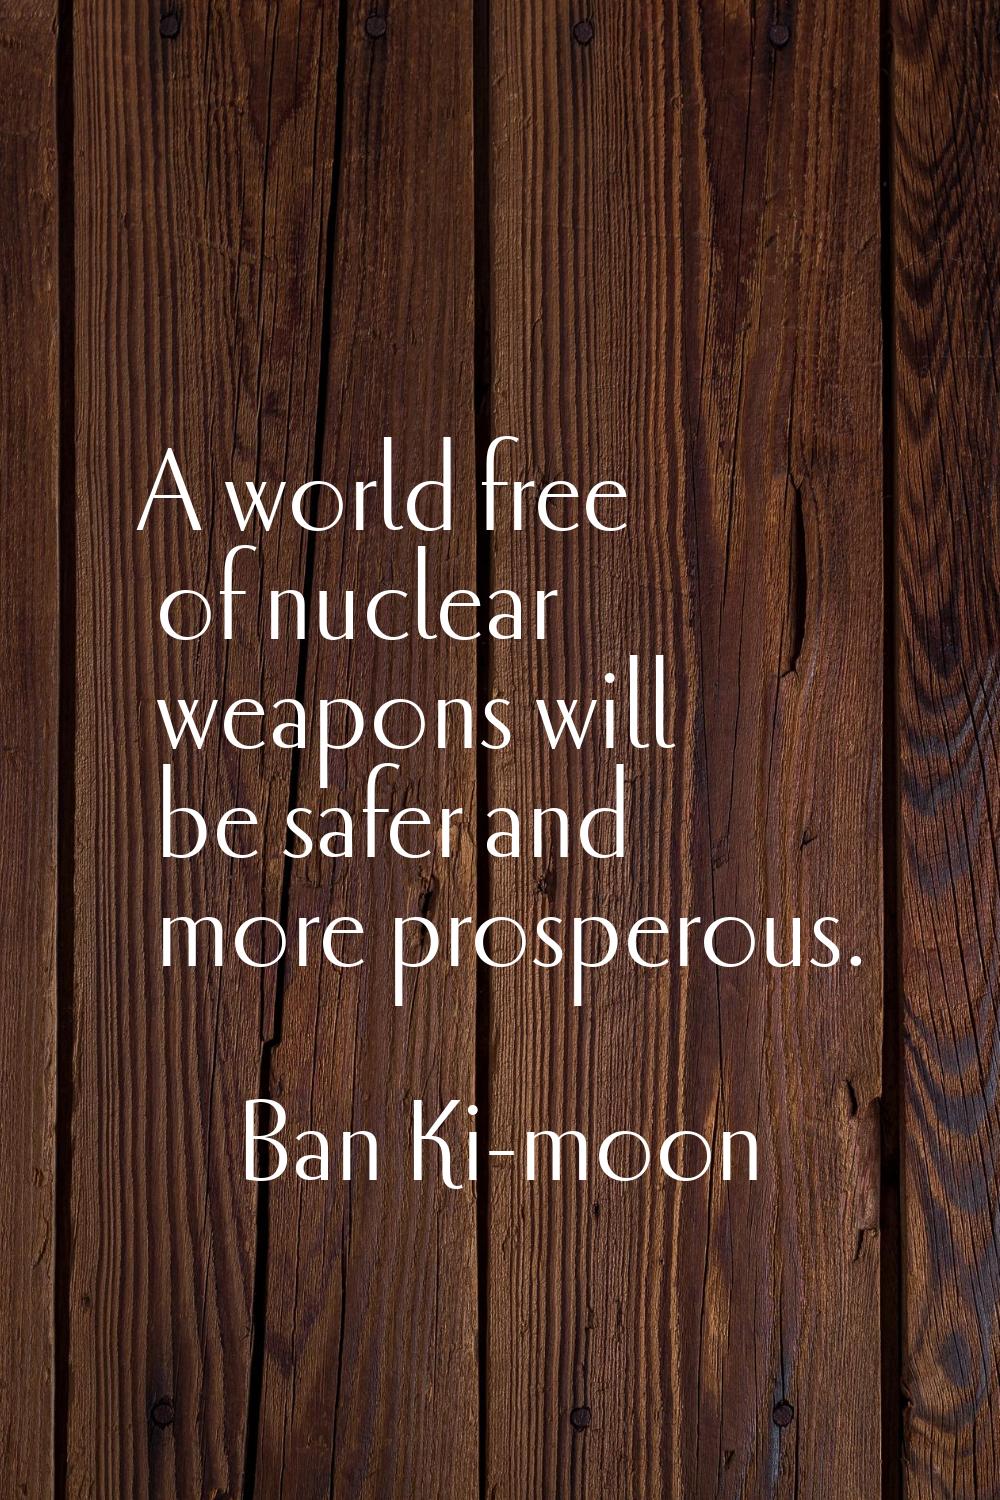 A world free of nuclear weapons will be safer and more prosperous.